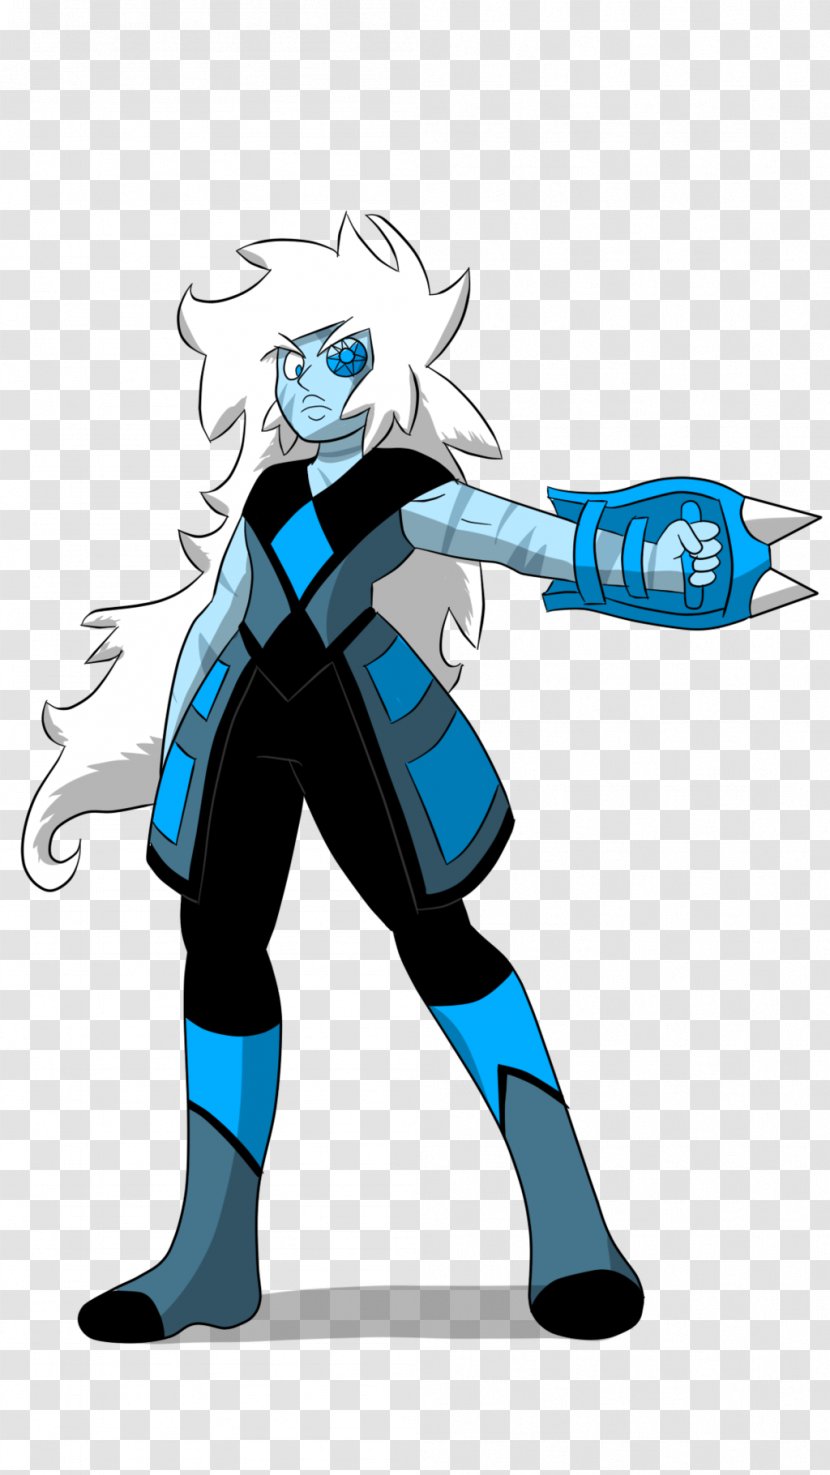 Weapon Onyx Alexandrite Gemstone Zircon - Mythical Creature Transparent PNG